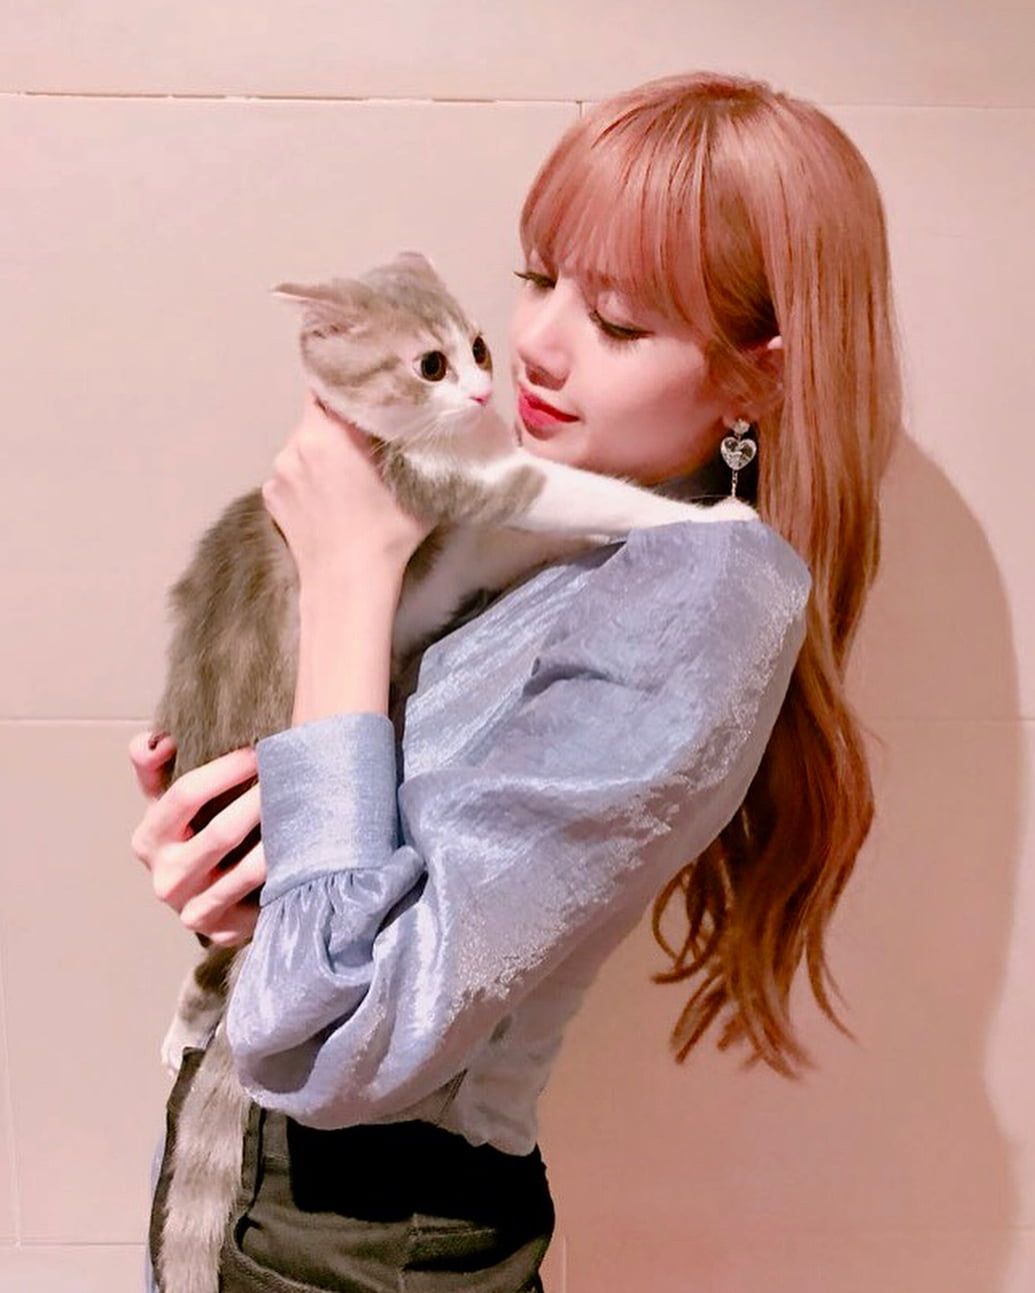 A woman holding up her cat in front of the camera - Cat, BLACKPINK